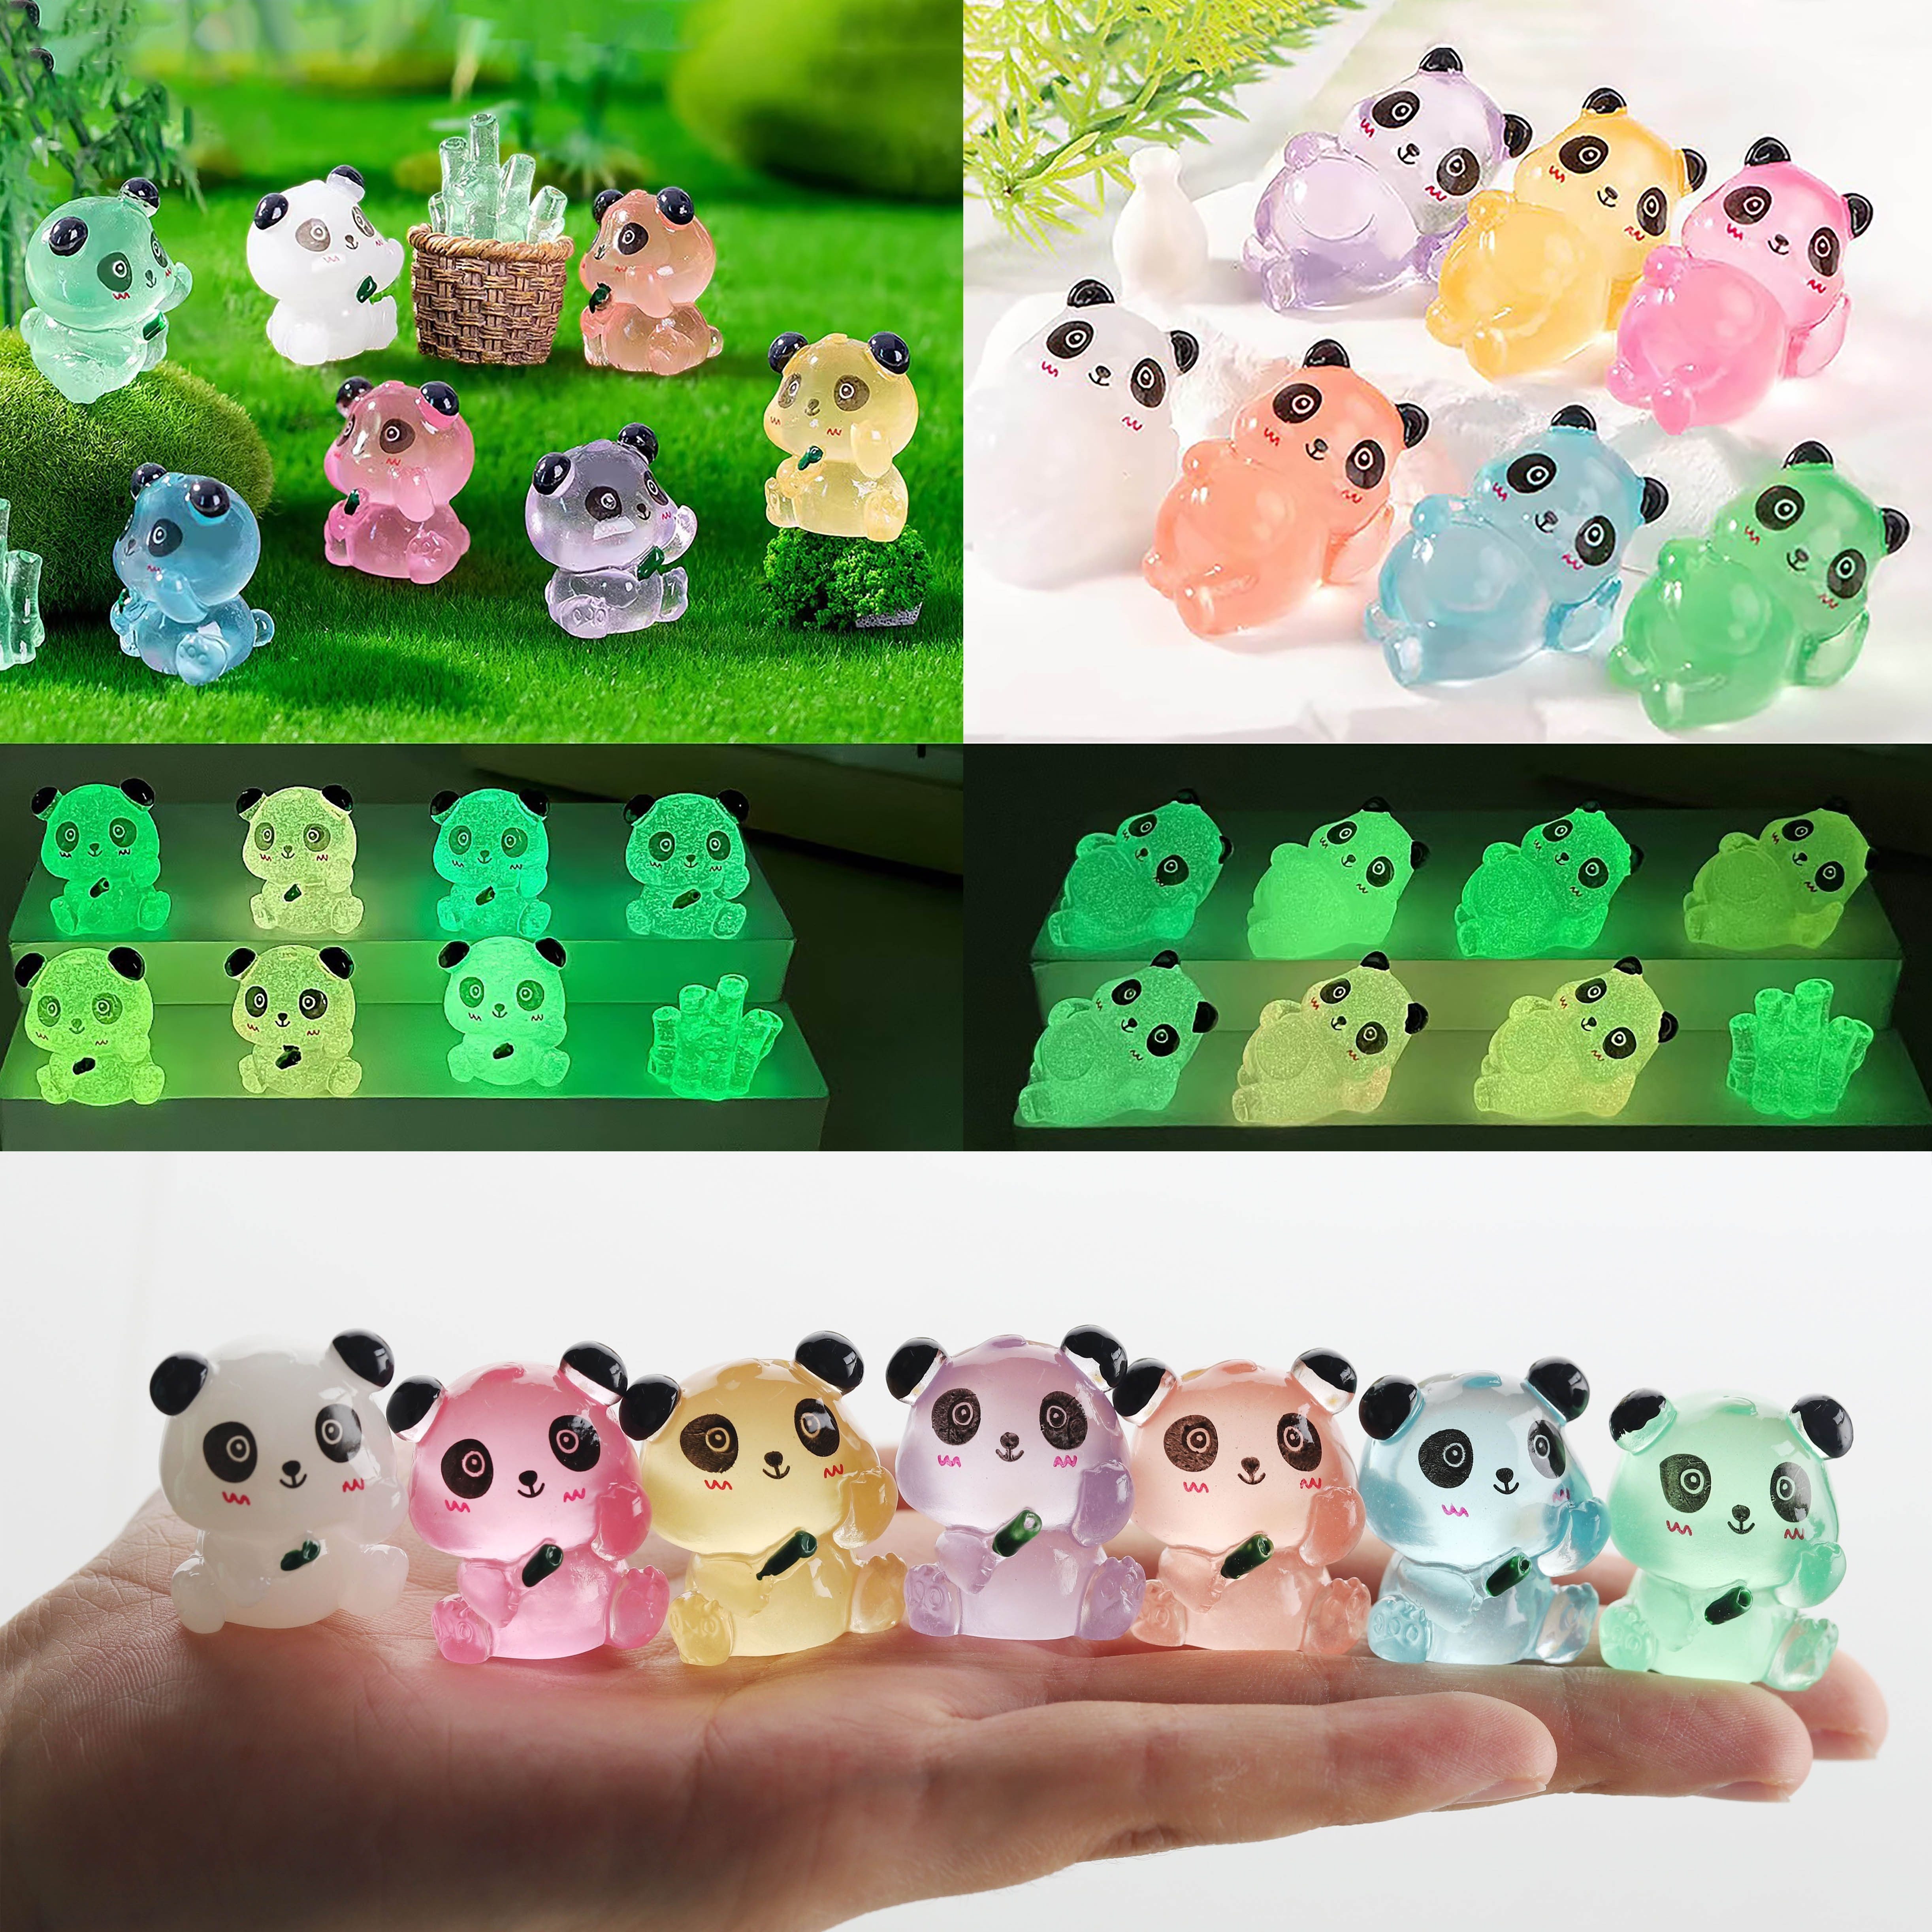 

7pcs Glow-in-the-dark Resin Panda Bamboo Creative Crafts Decoration, Suitable For Room Decoration, Car Decoration And Diy Creative Scenery